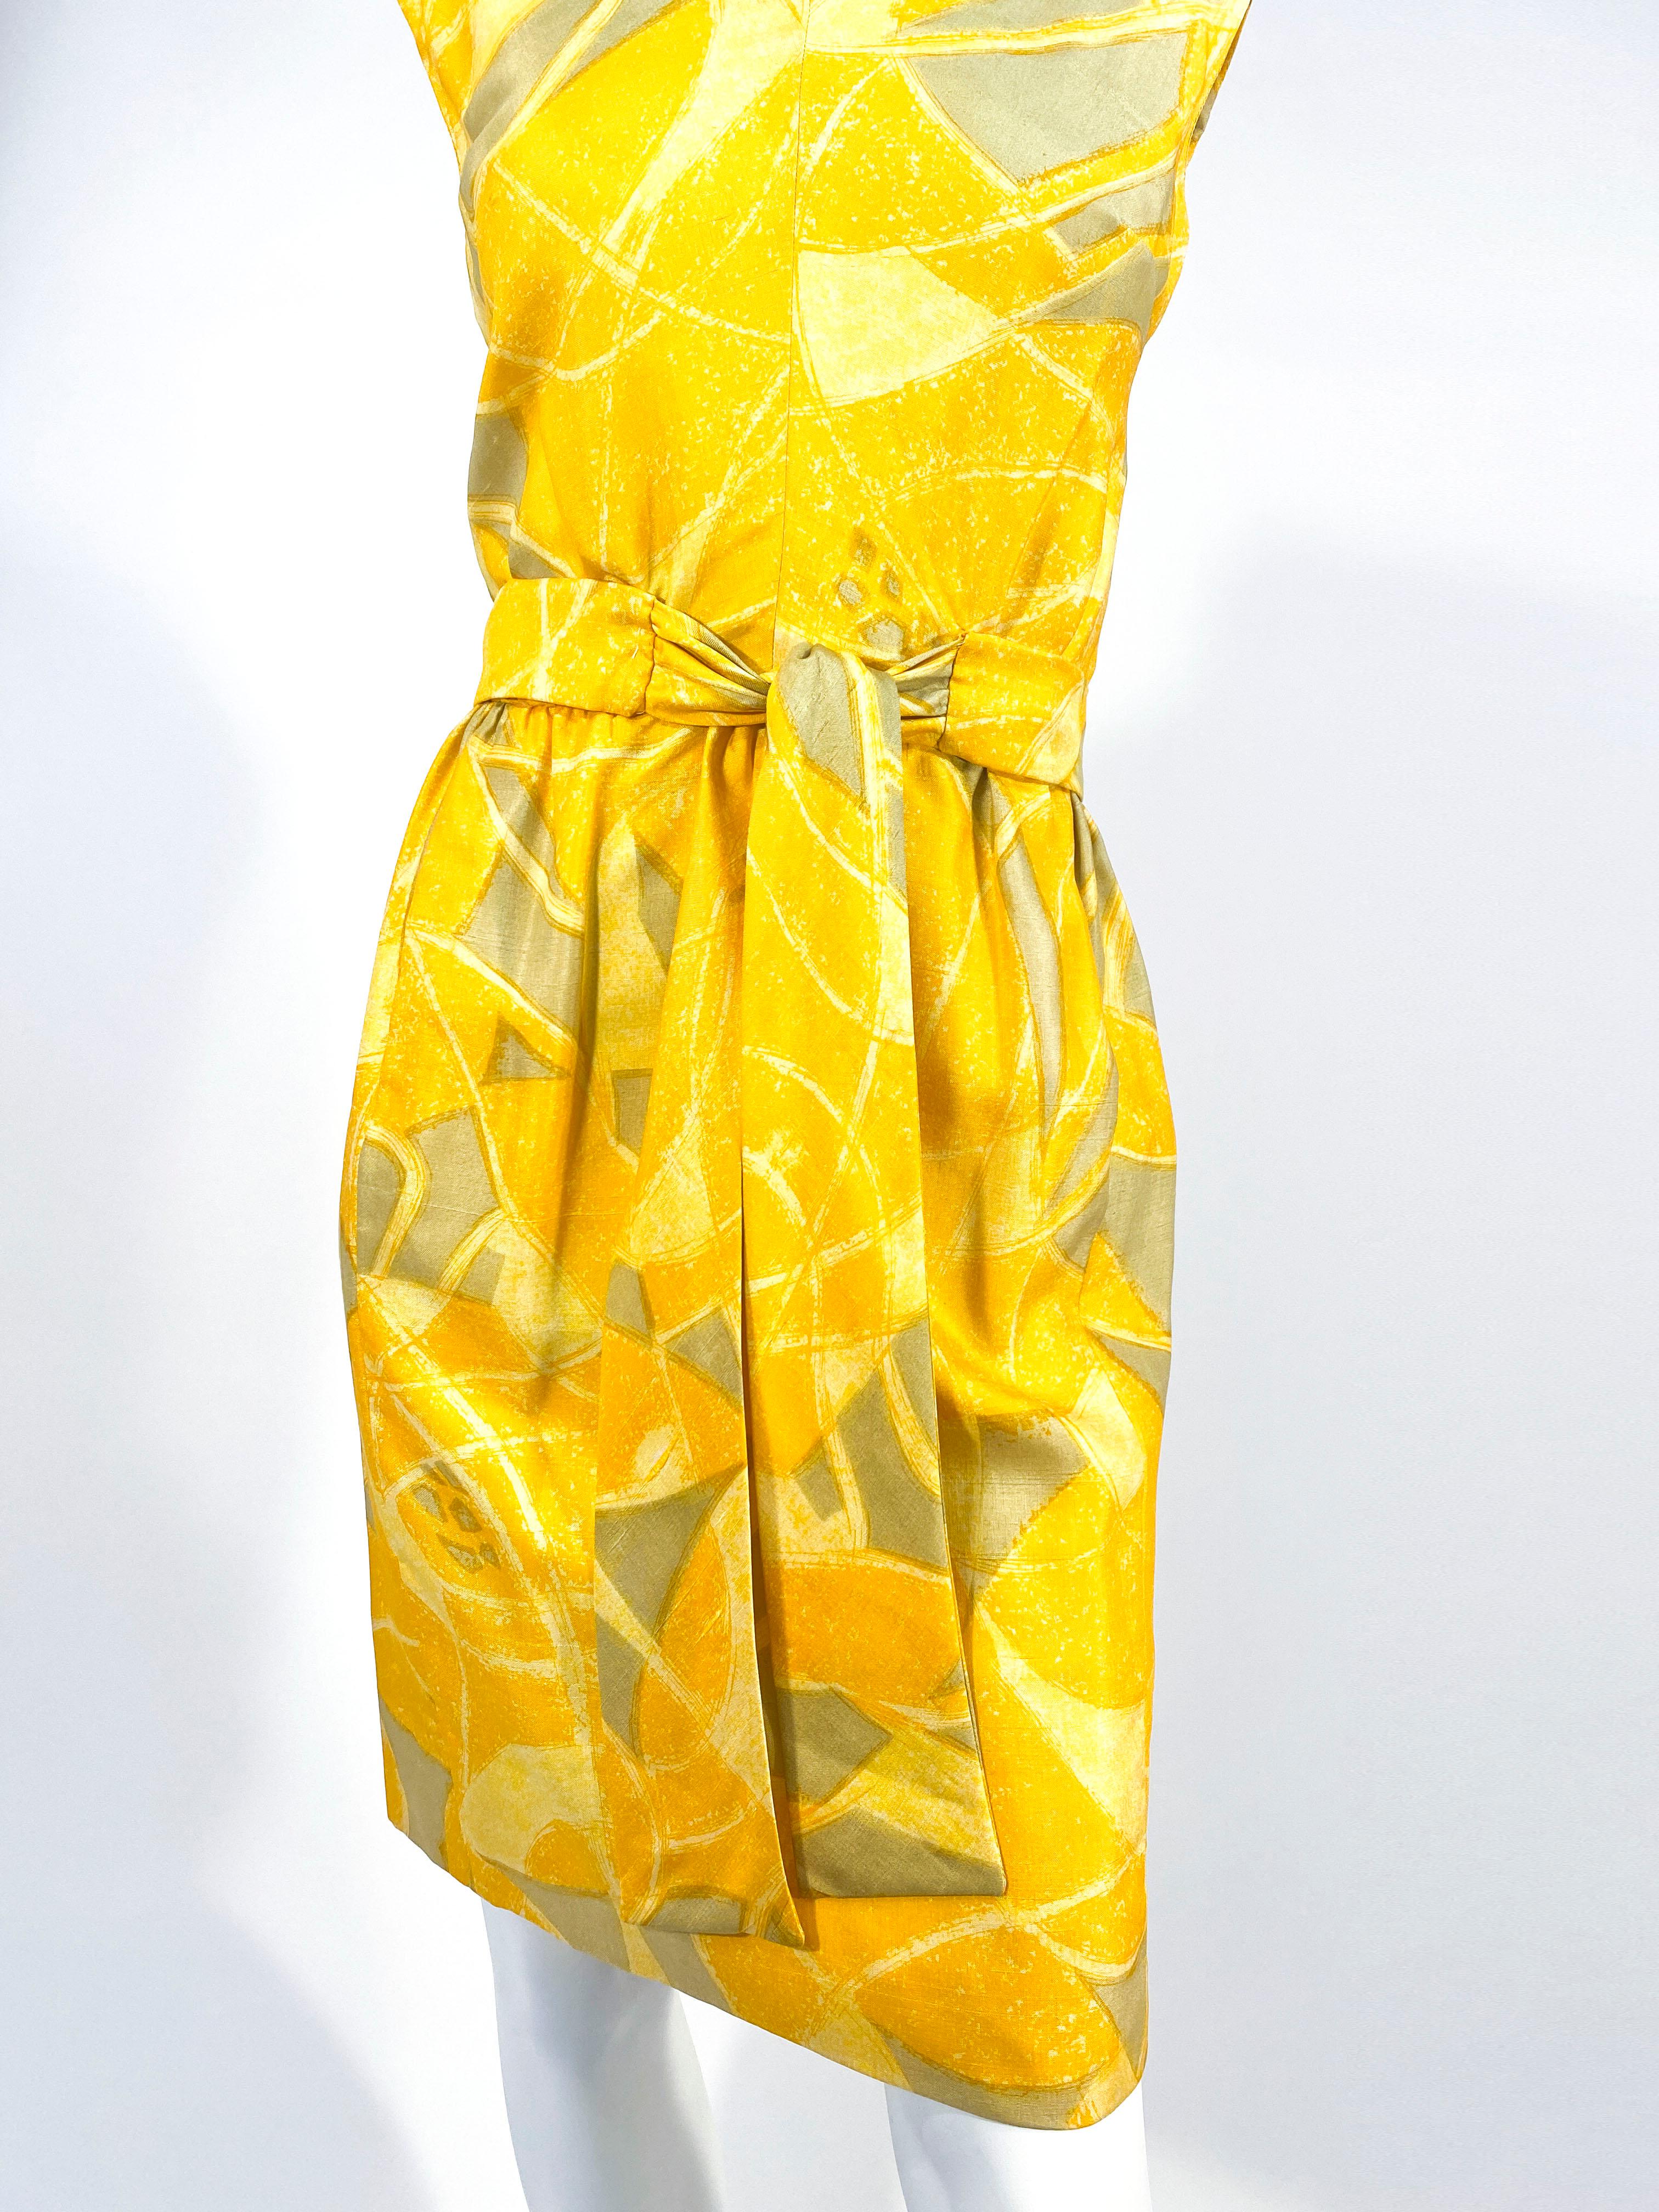 1960s Shannon Rodgers for Jerry Silverman abstract printed sheath dress in hues of yellow, soft golds, and light avocado. The sash belt is attached in the front where it ties while the back has snaps to secure the dress closed. The back also has a